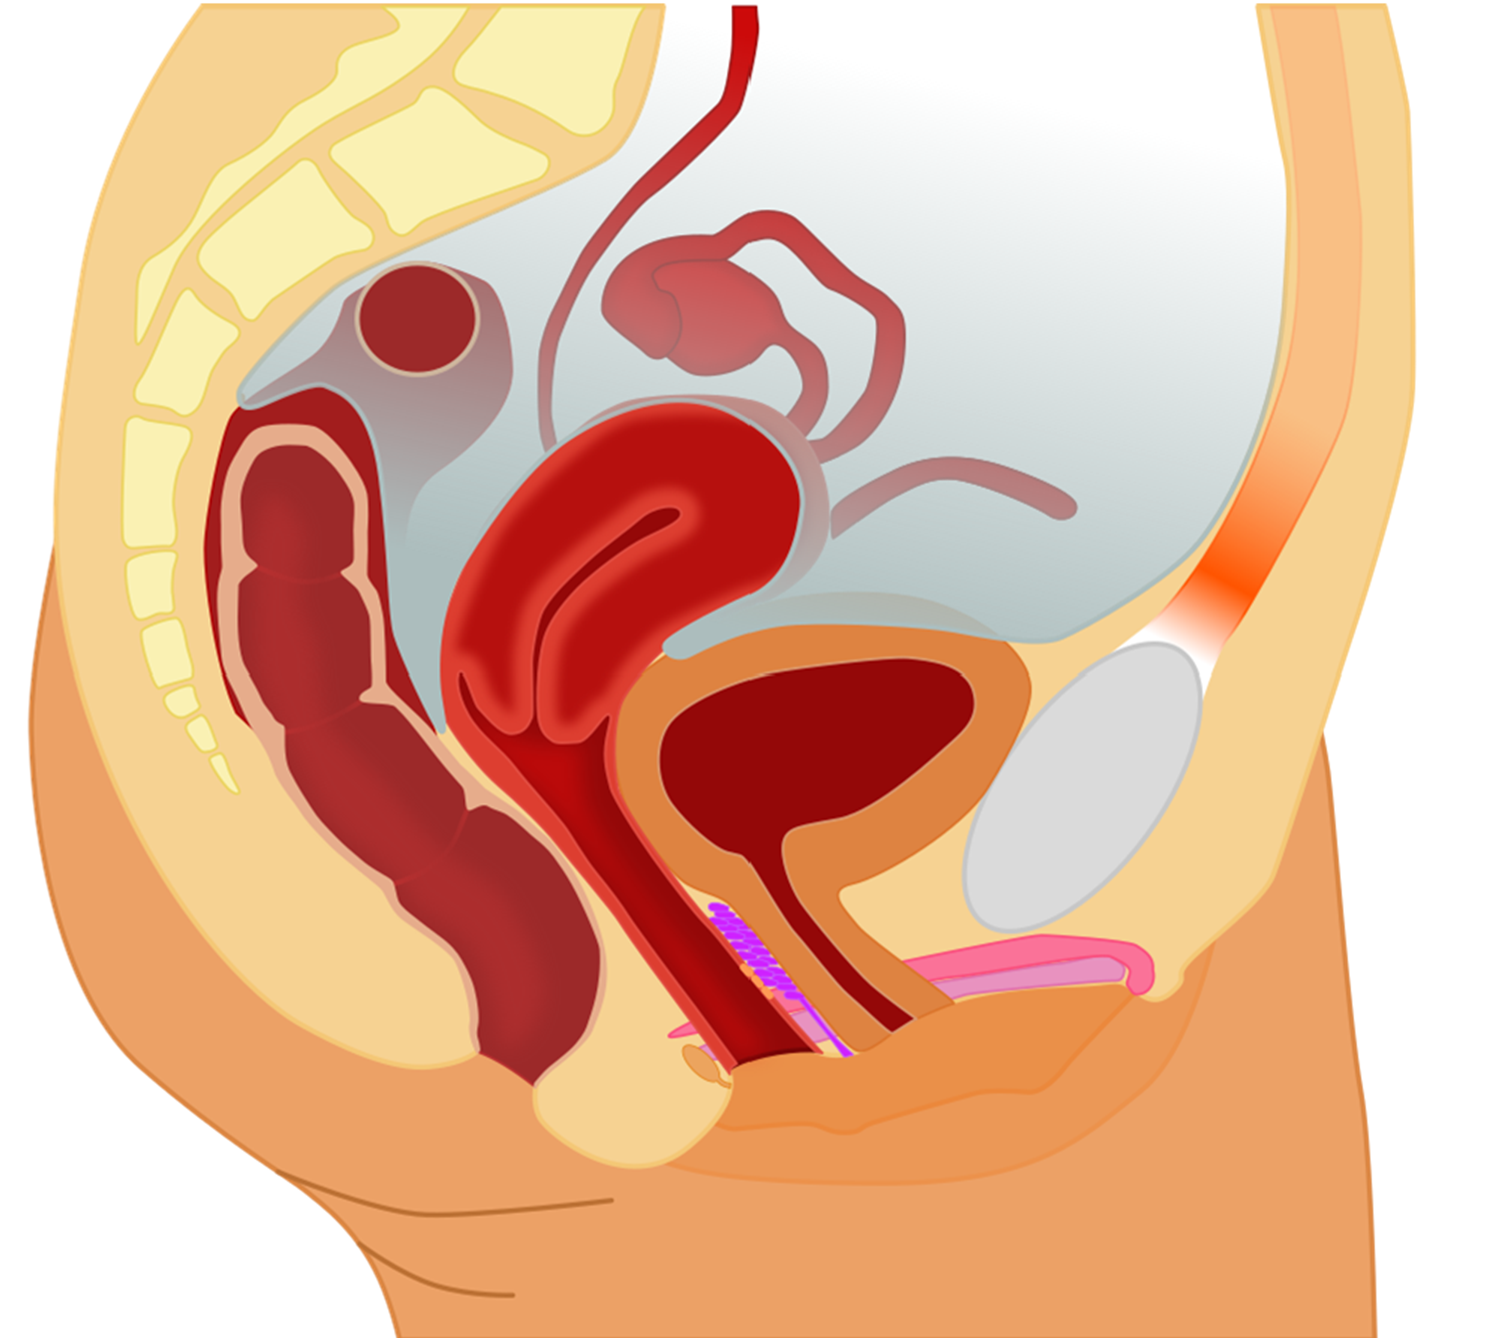 Female reproductive figure for labeling